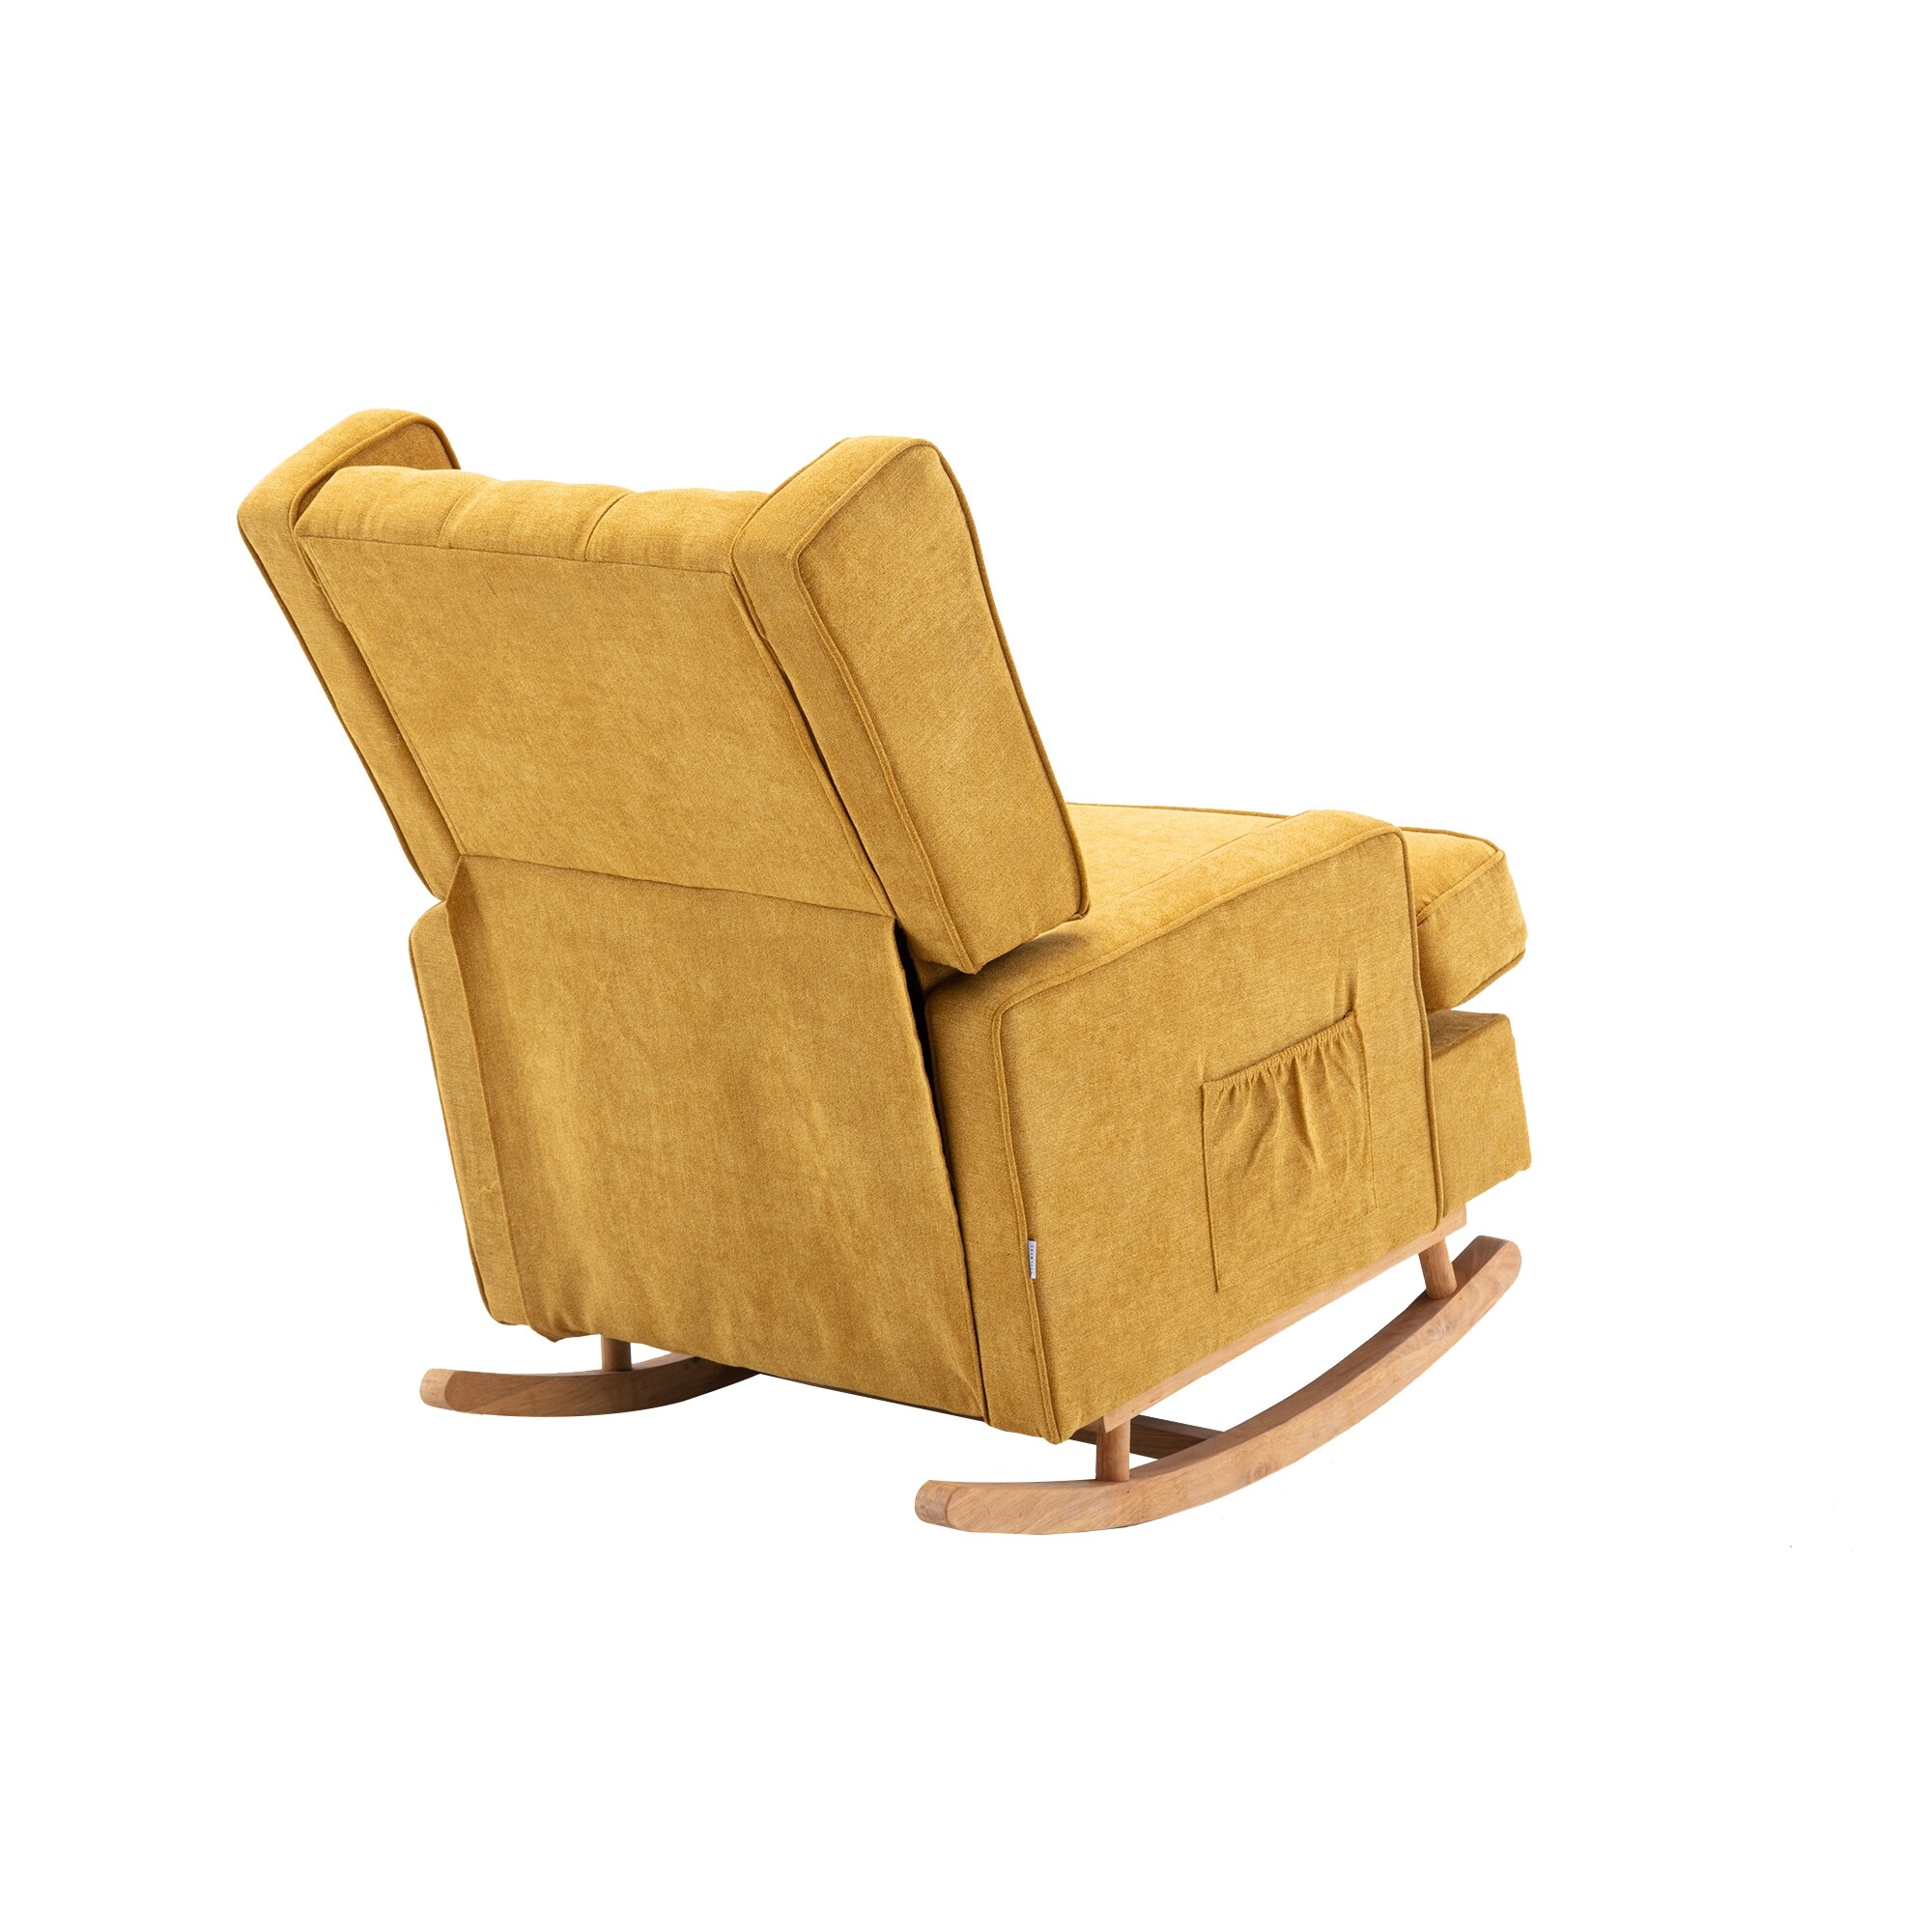 Comfortable Rocking Chair with High Backrest and Cozy Armrest, Mustard